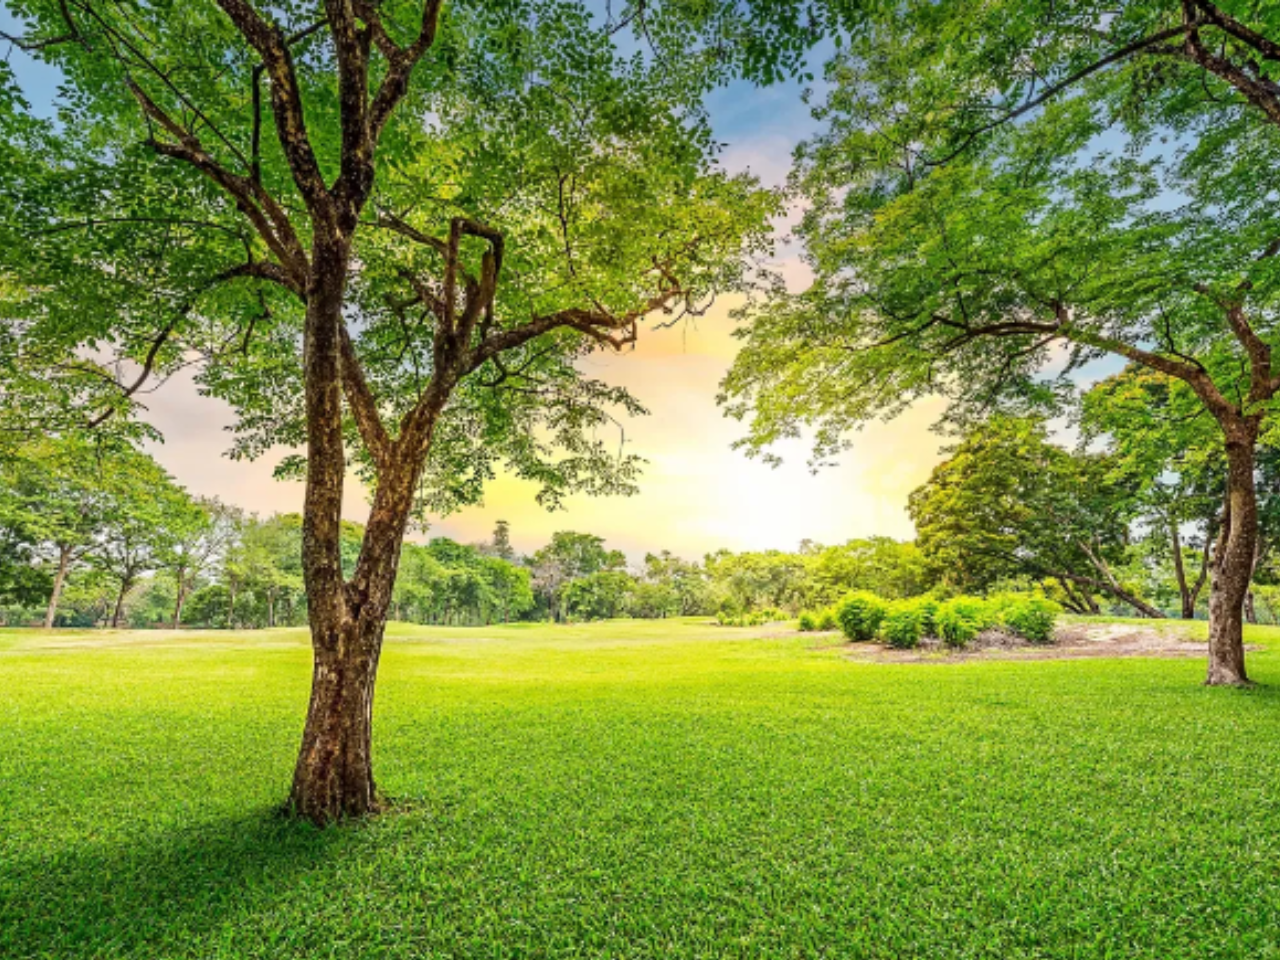 a green grassy field with trees and a sun